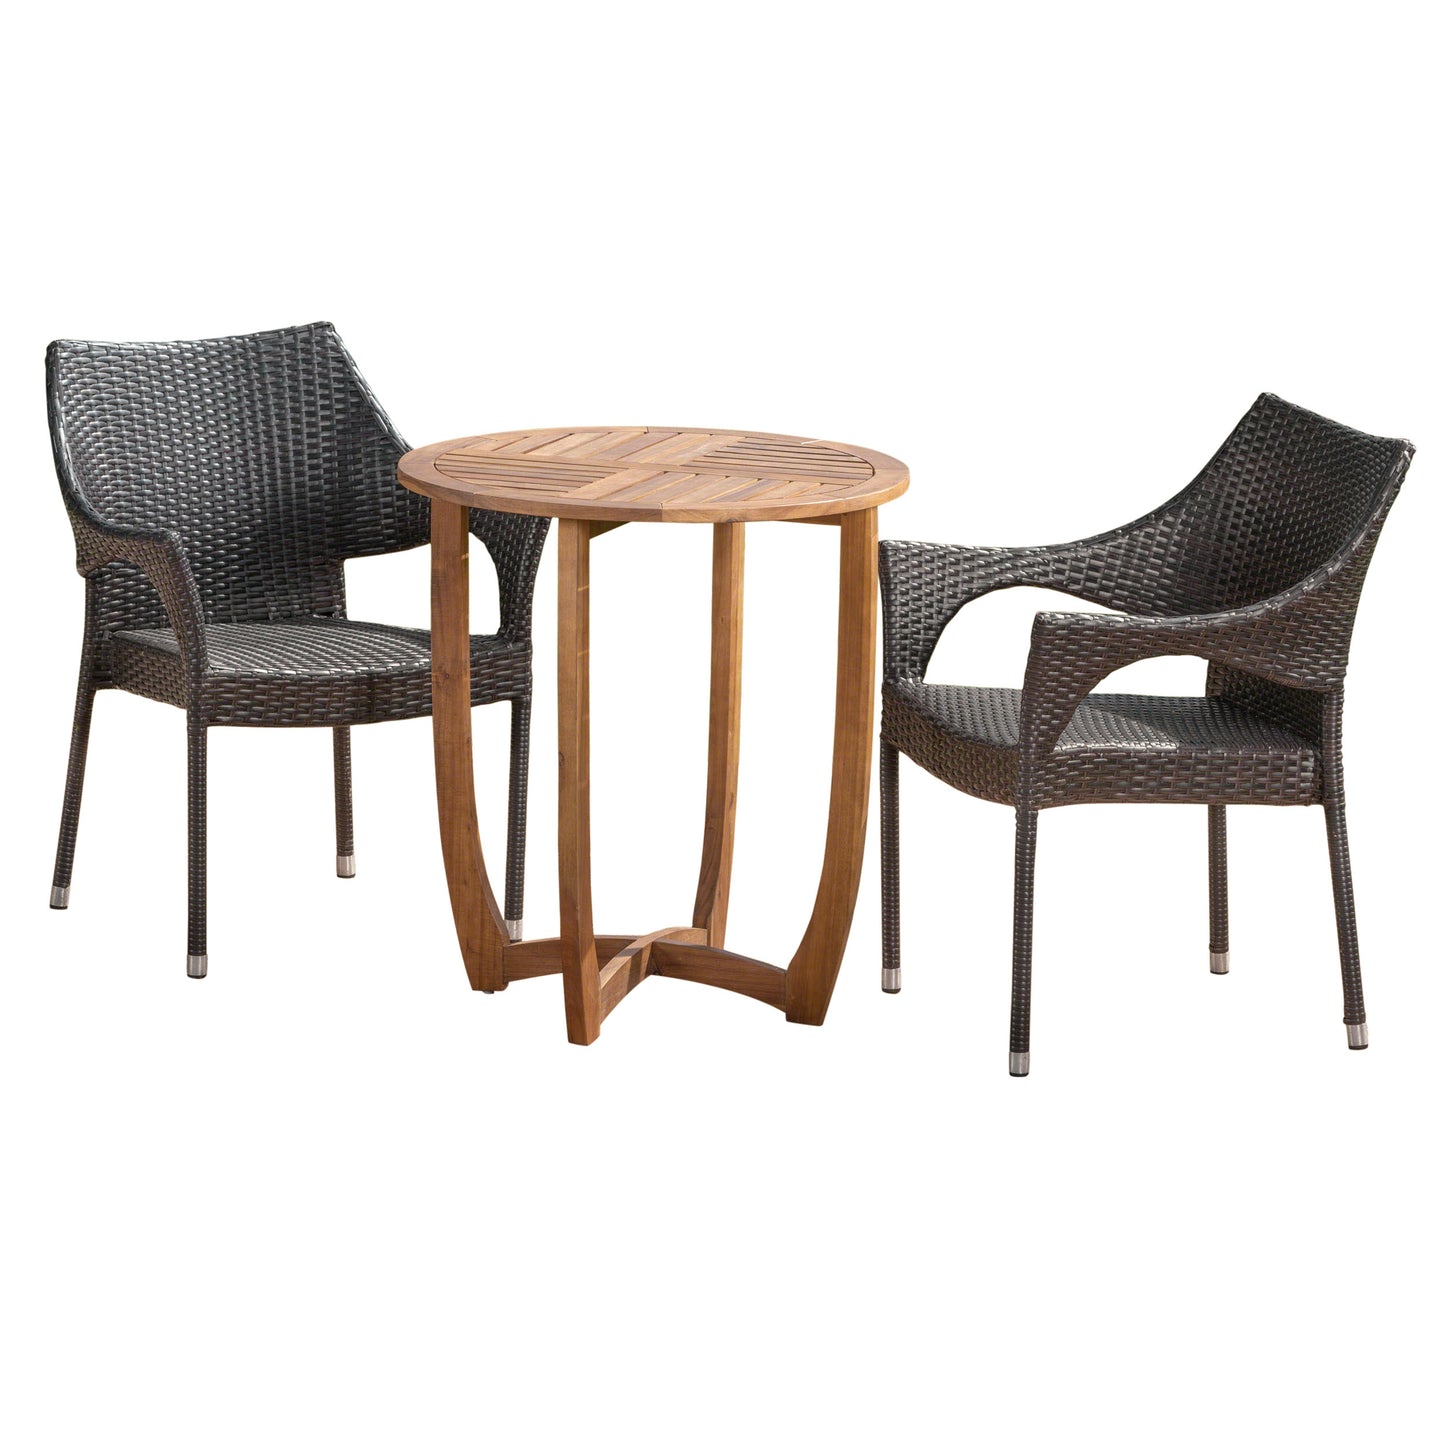 Ethan Outdoor 3 Piece  Acacia Wood/ Wicker Bistro Set, Teak Finish and Multibrown